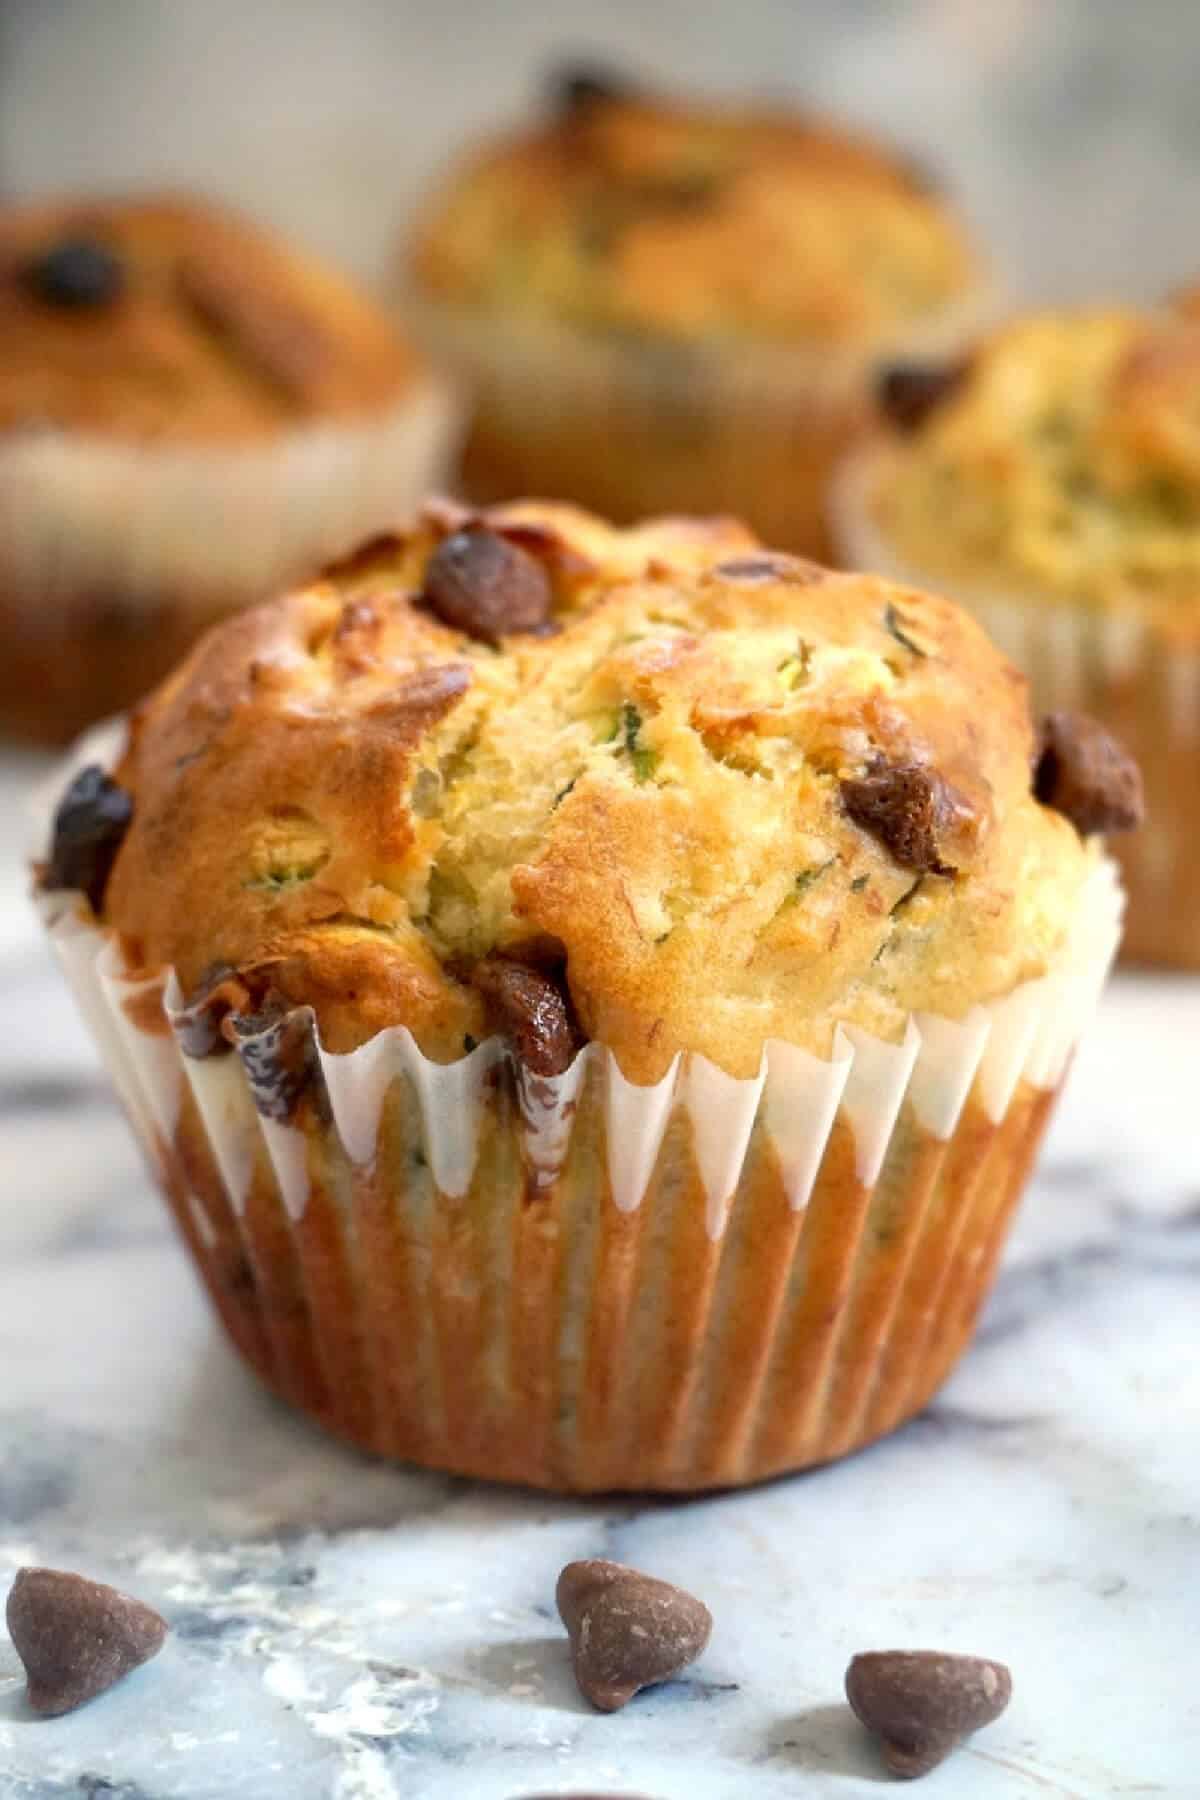 A muffin with chocolate chips.